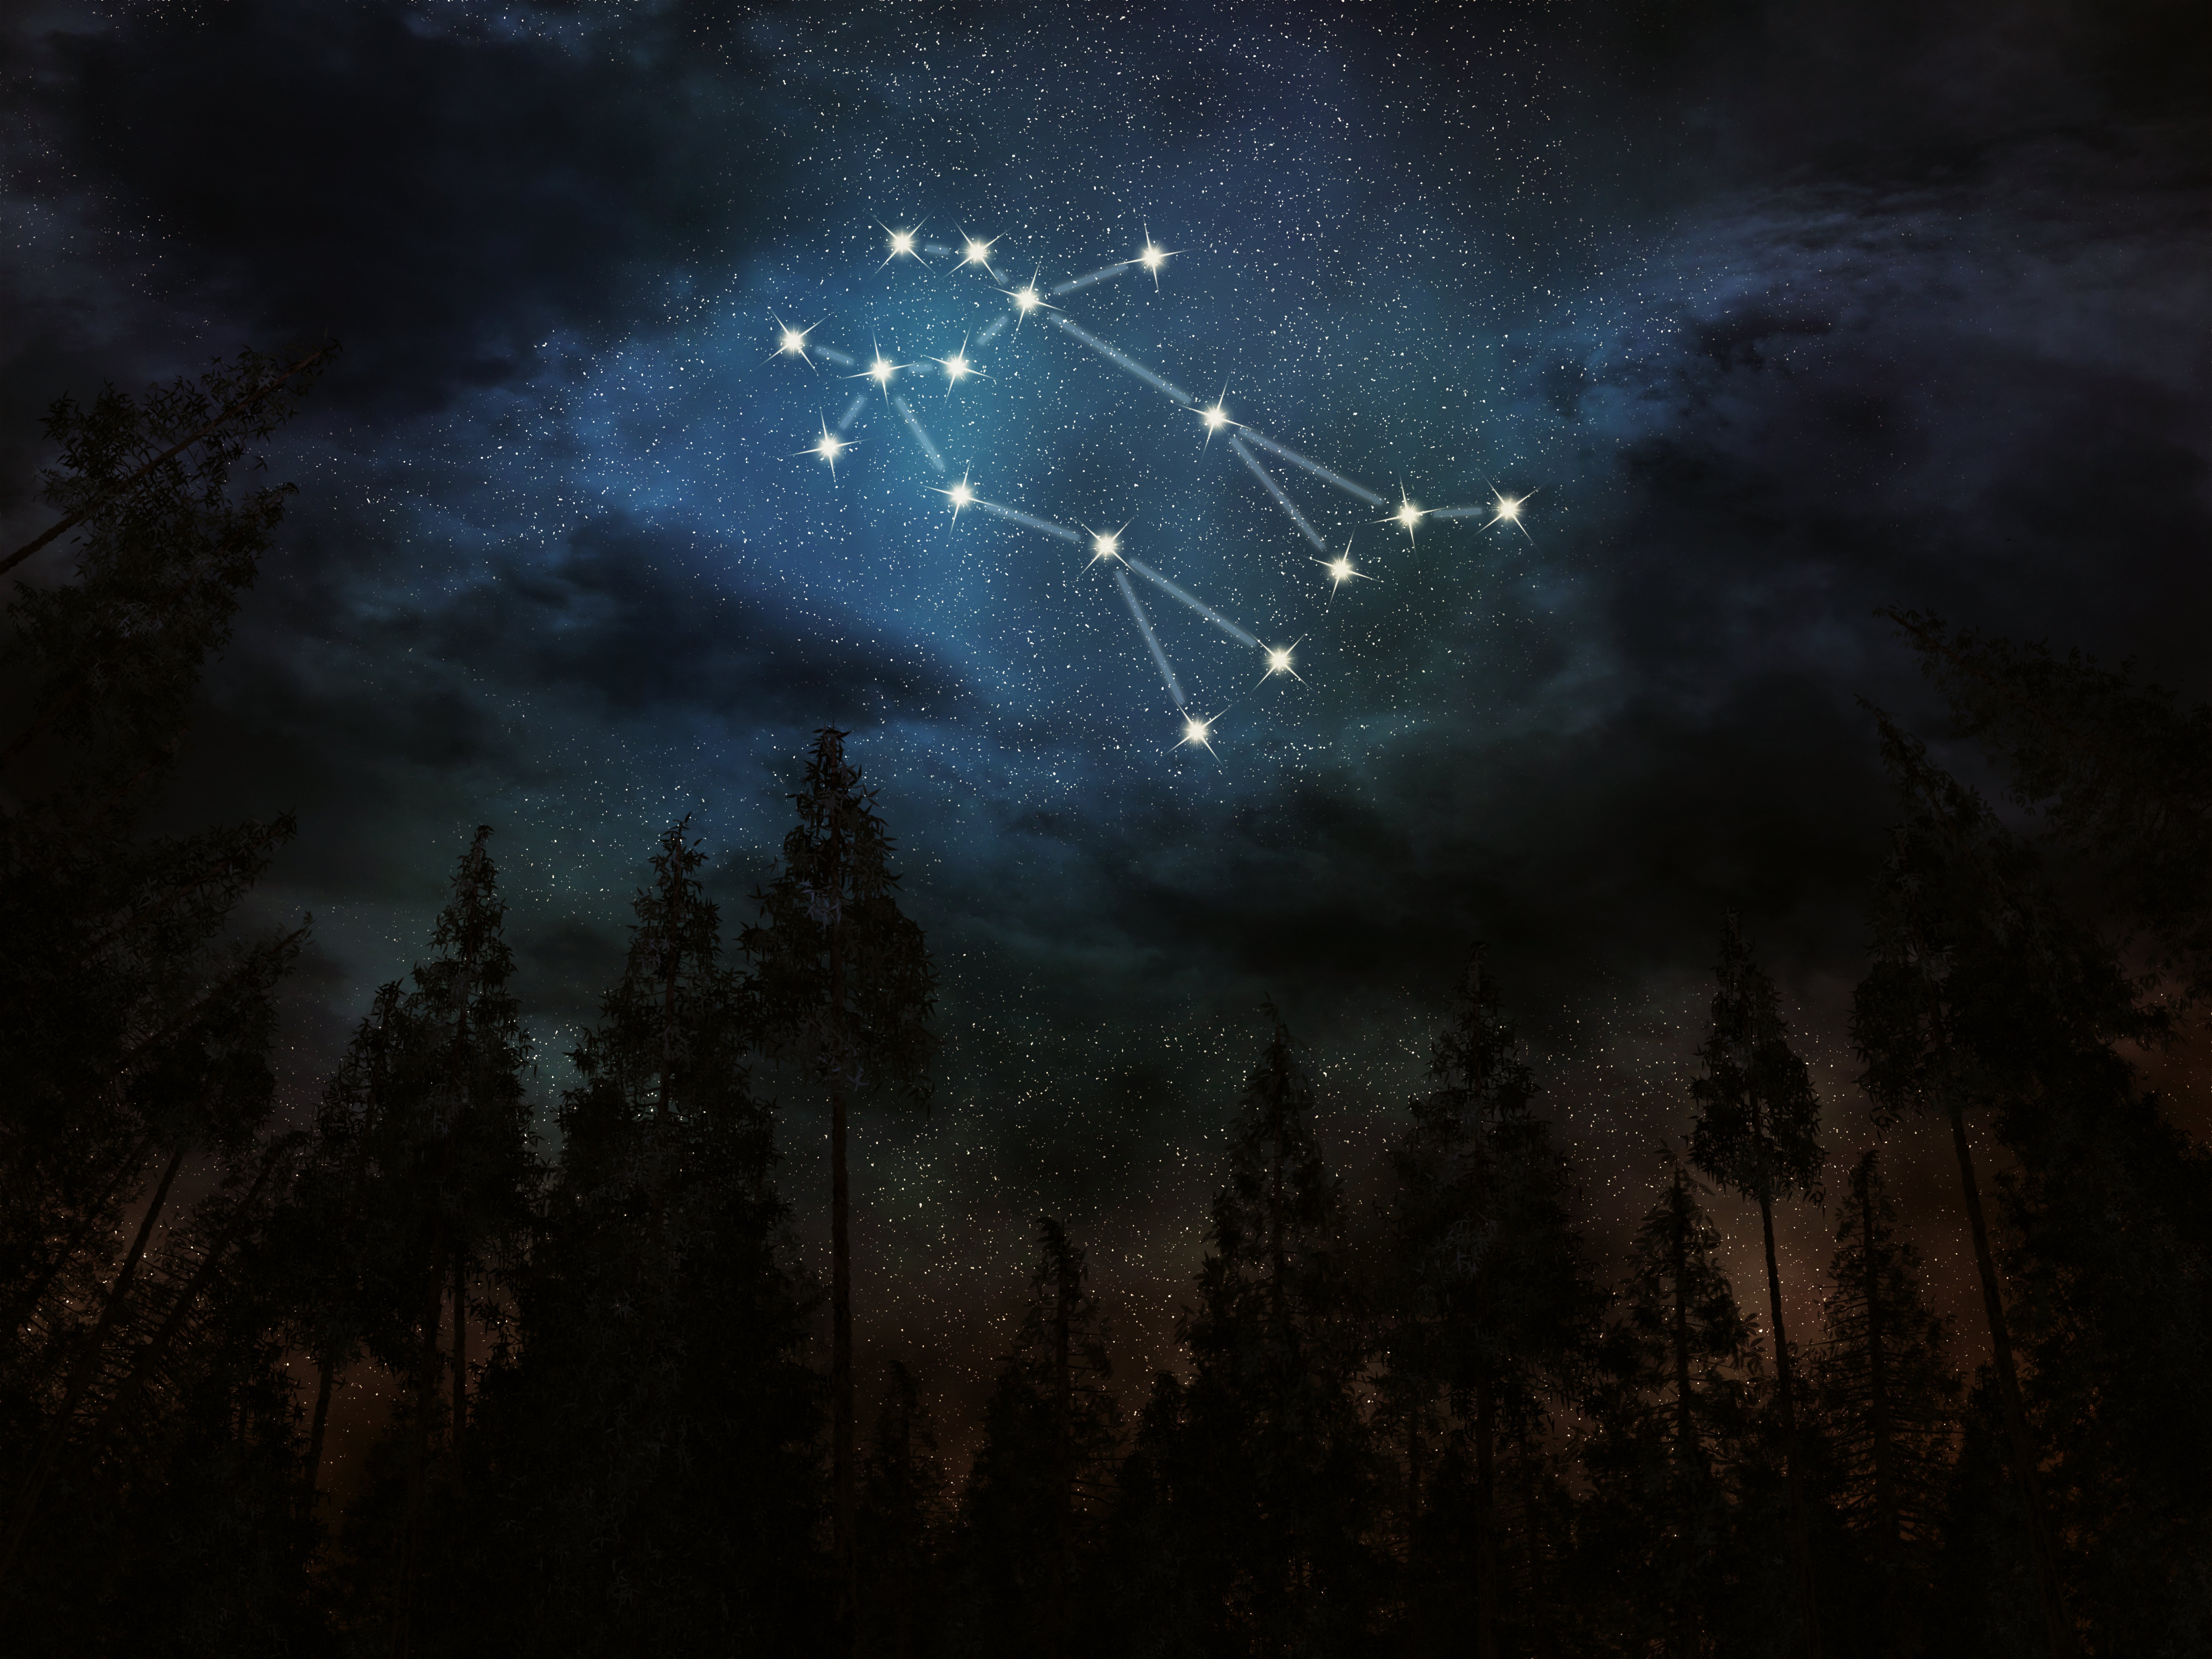 An illustration of the Gemini constellation in the night sky | Source: Shutterstock